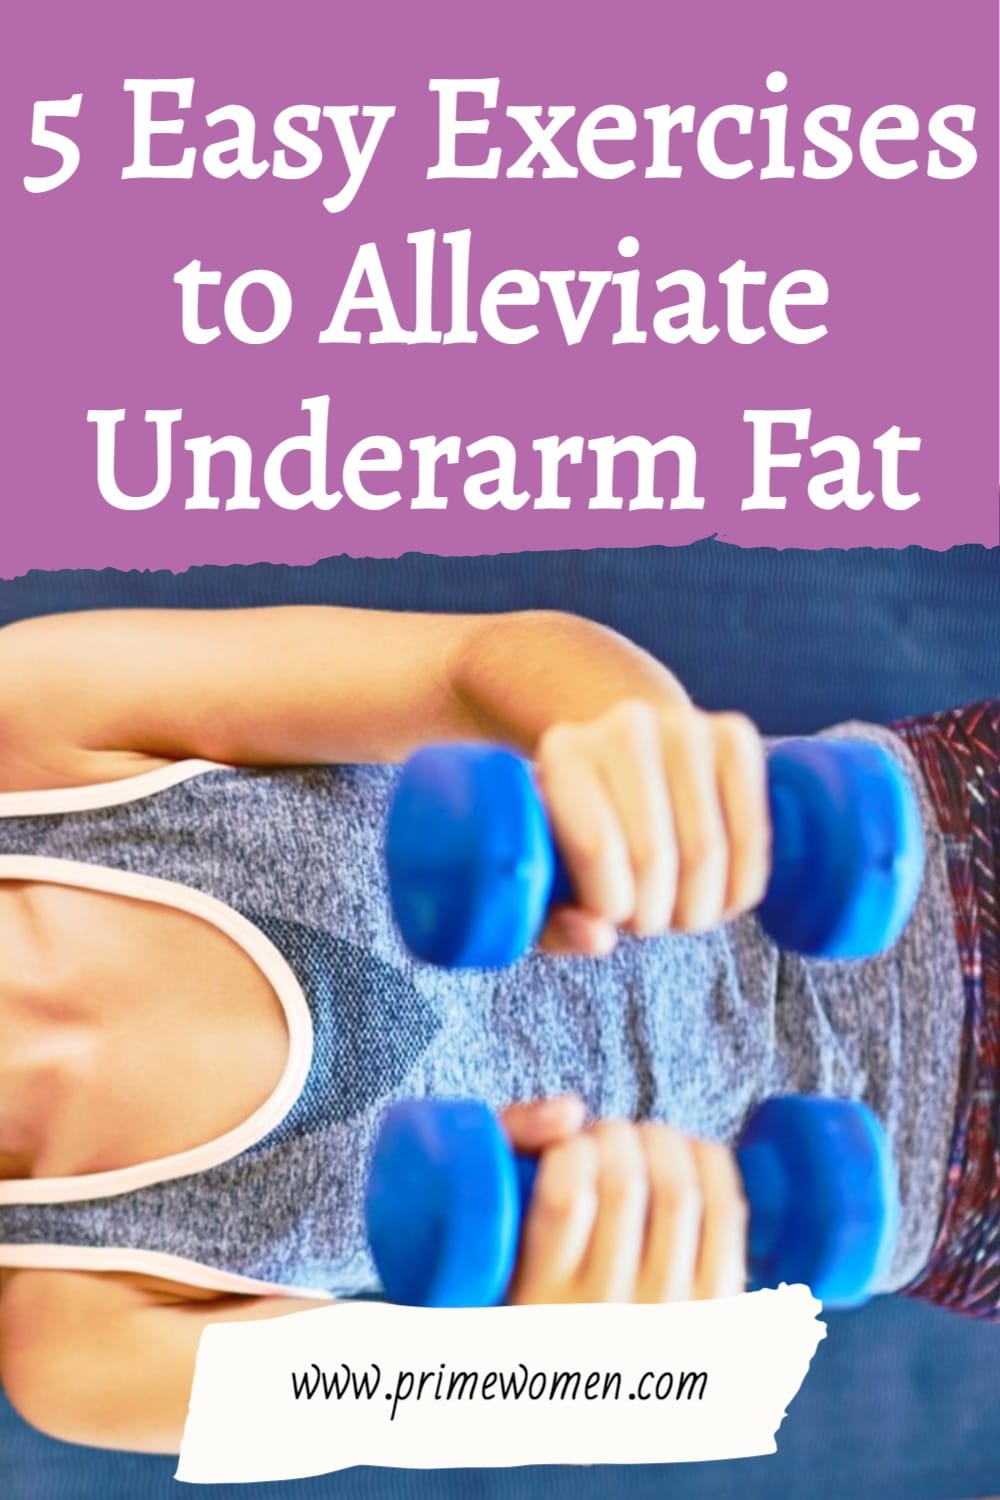 5-Easy-Exercises-to-Alleviate-Underarm-Fat